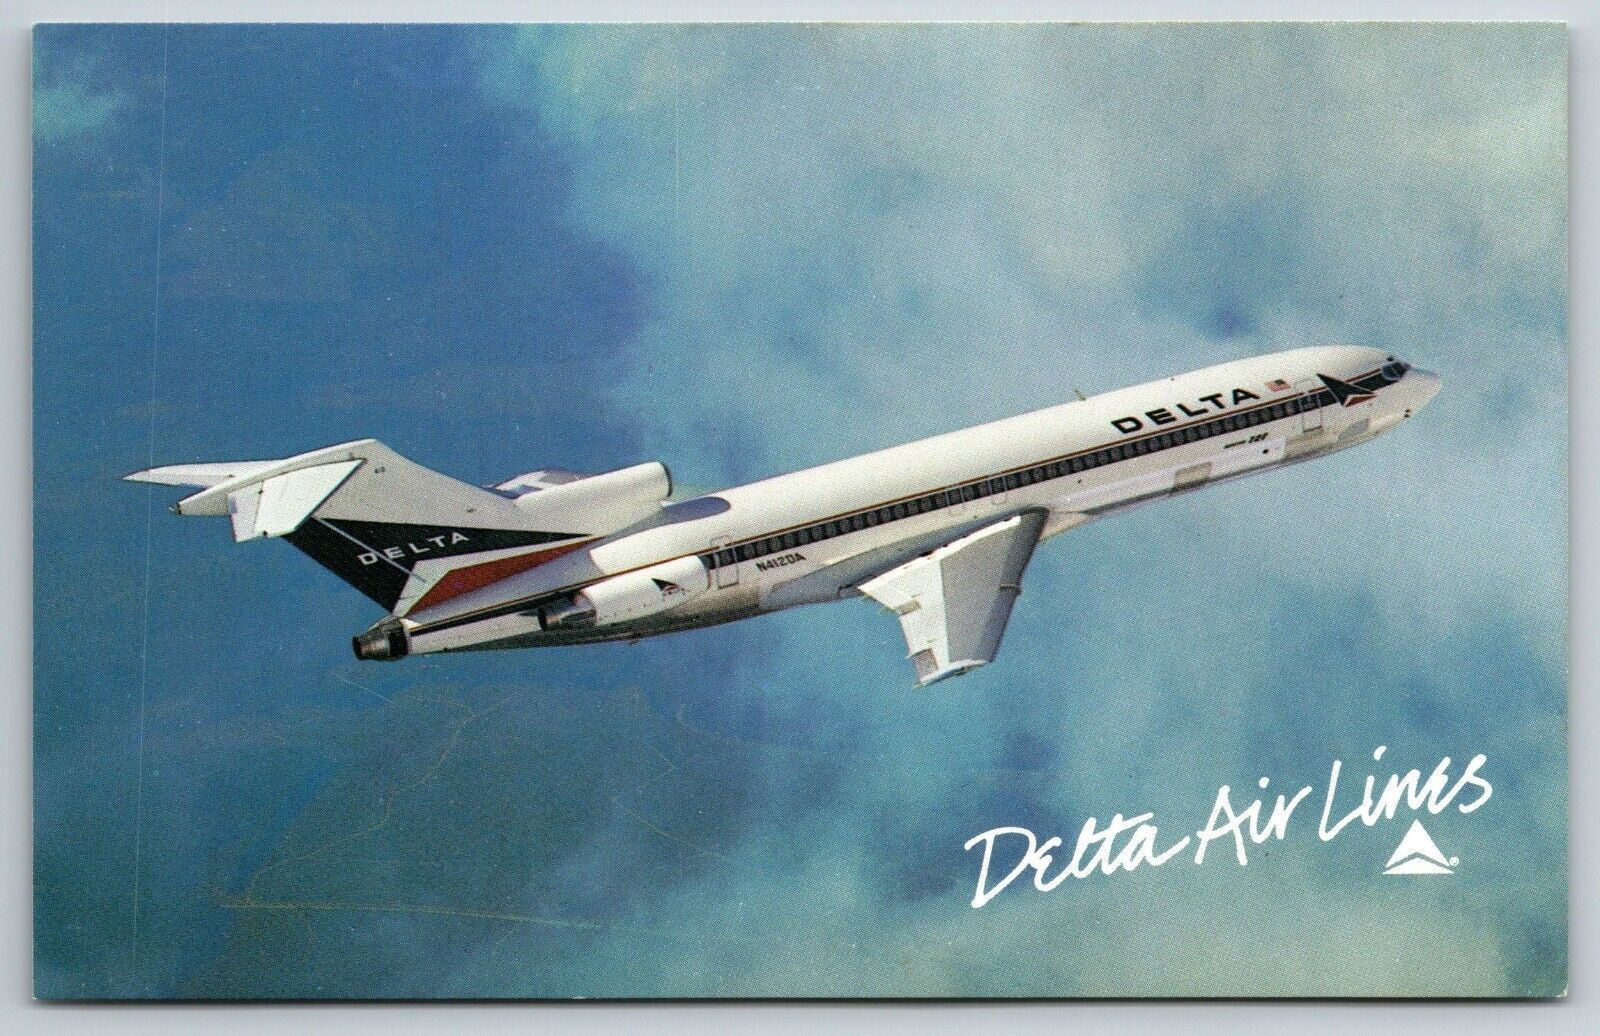 Delta Airlines Issued Boeing 727 Medium Jet Airplane Unposted Chrome Postcard